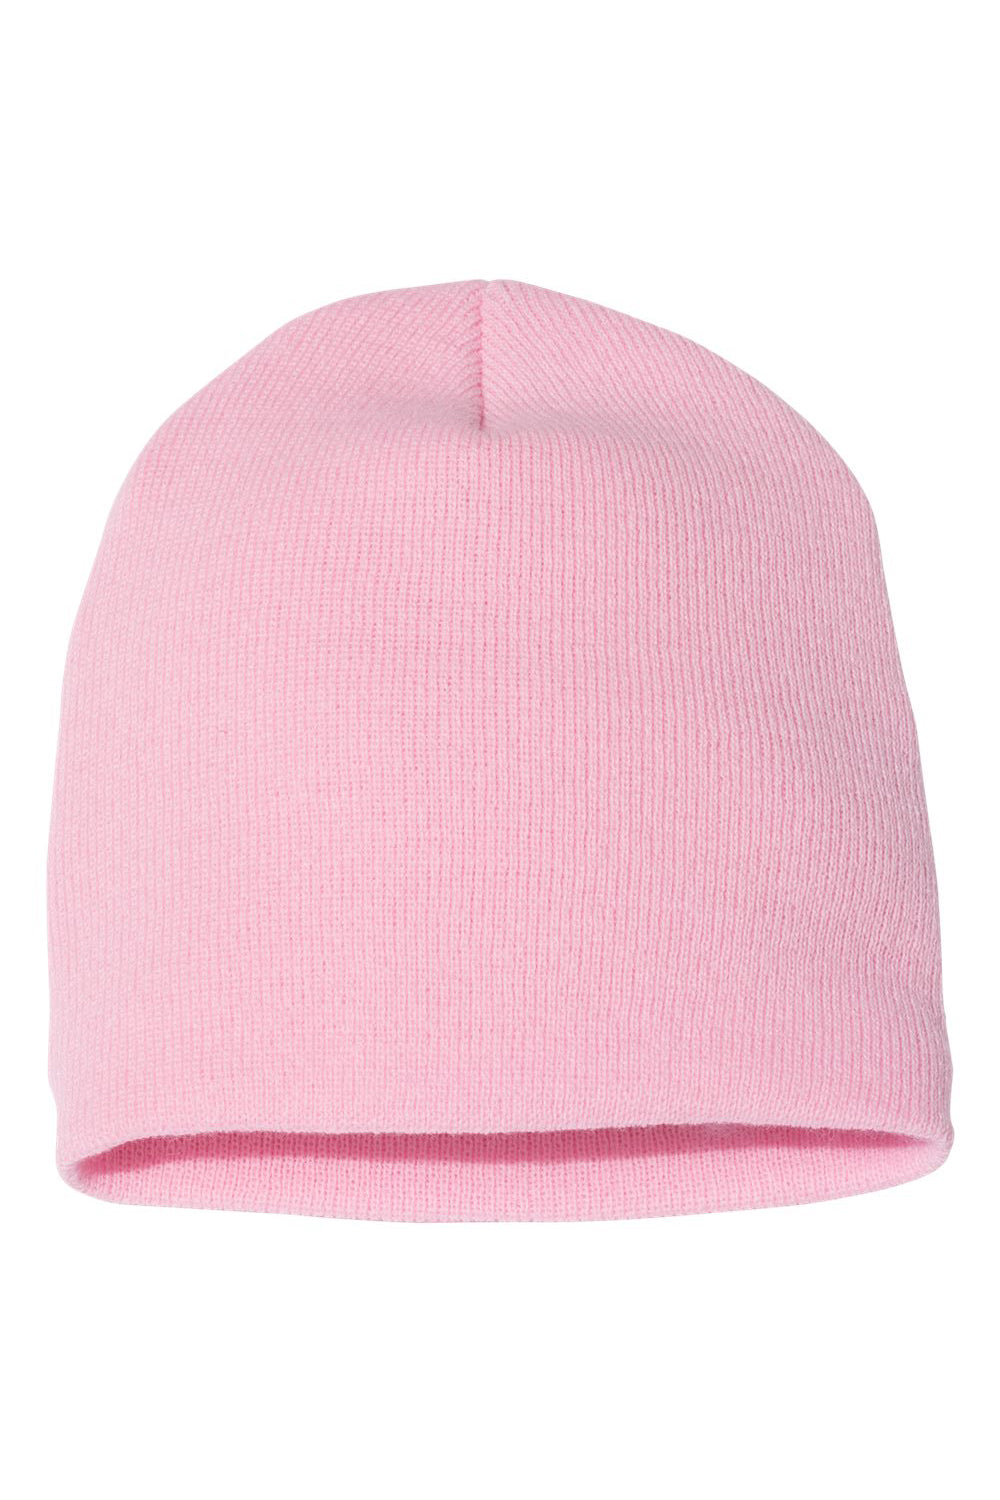 Yupoong 1500KC Mens Beanie Baby Pink Flat Front